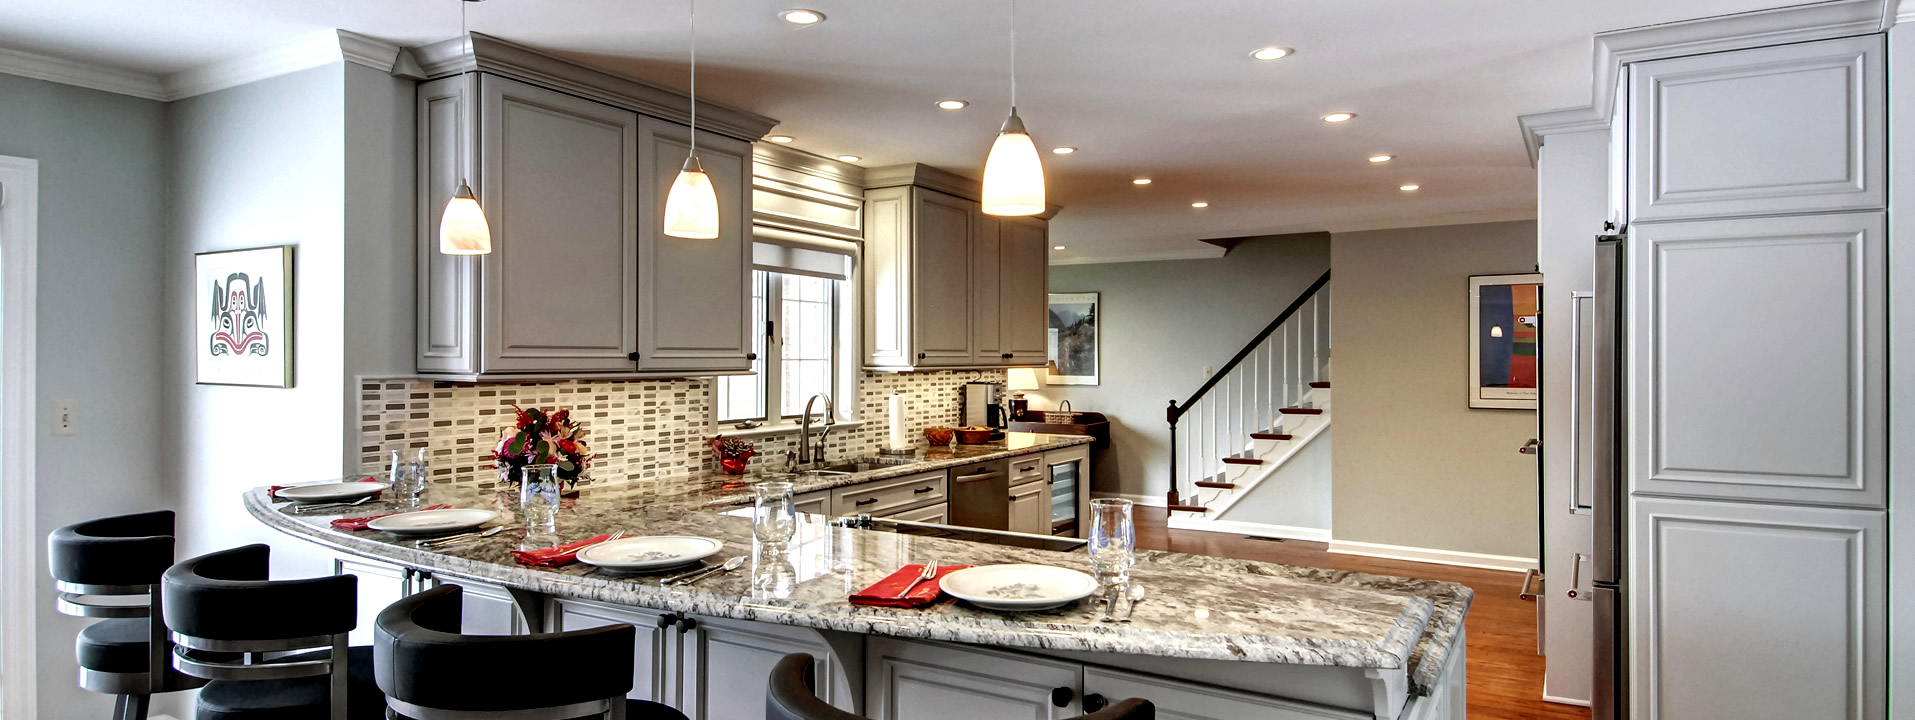 Greenville's Top Rated Kitchen Remodeling Contractors - Greenville